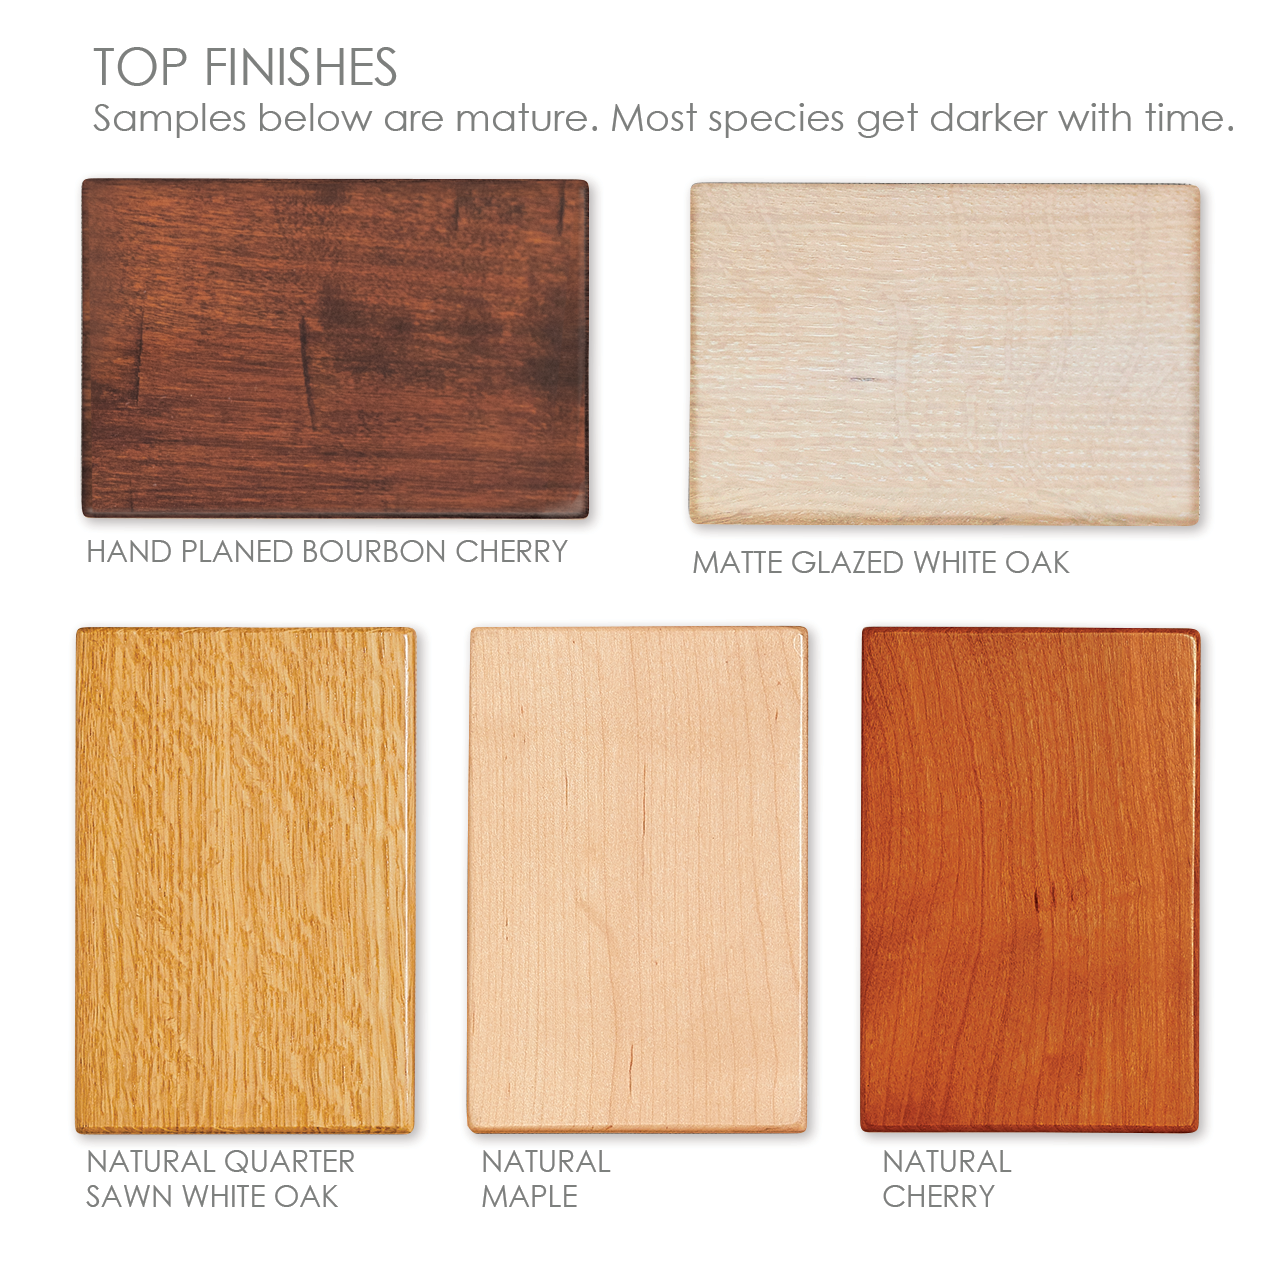 wood-samples-with-copy_681211ad-7f9c-4398-8cff-aa981cb295ff.png